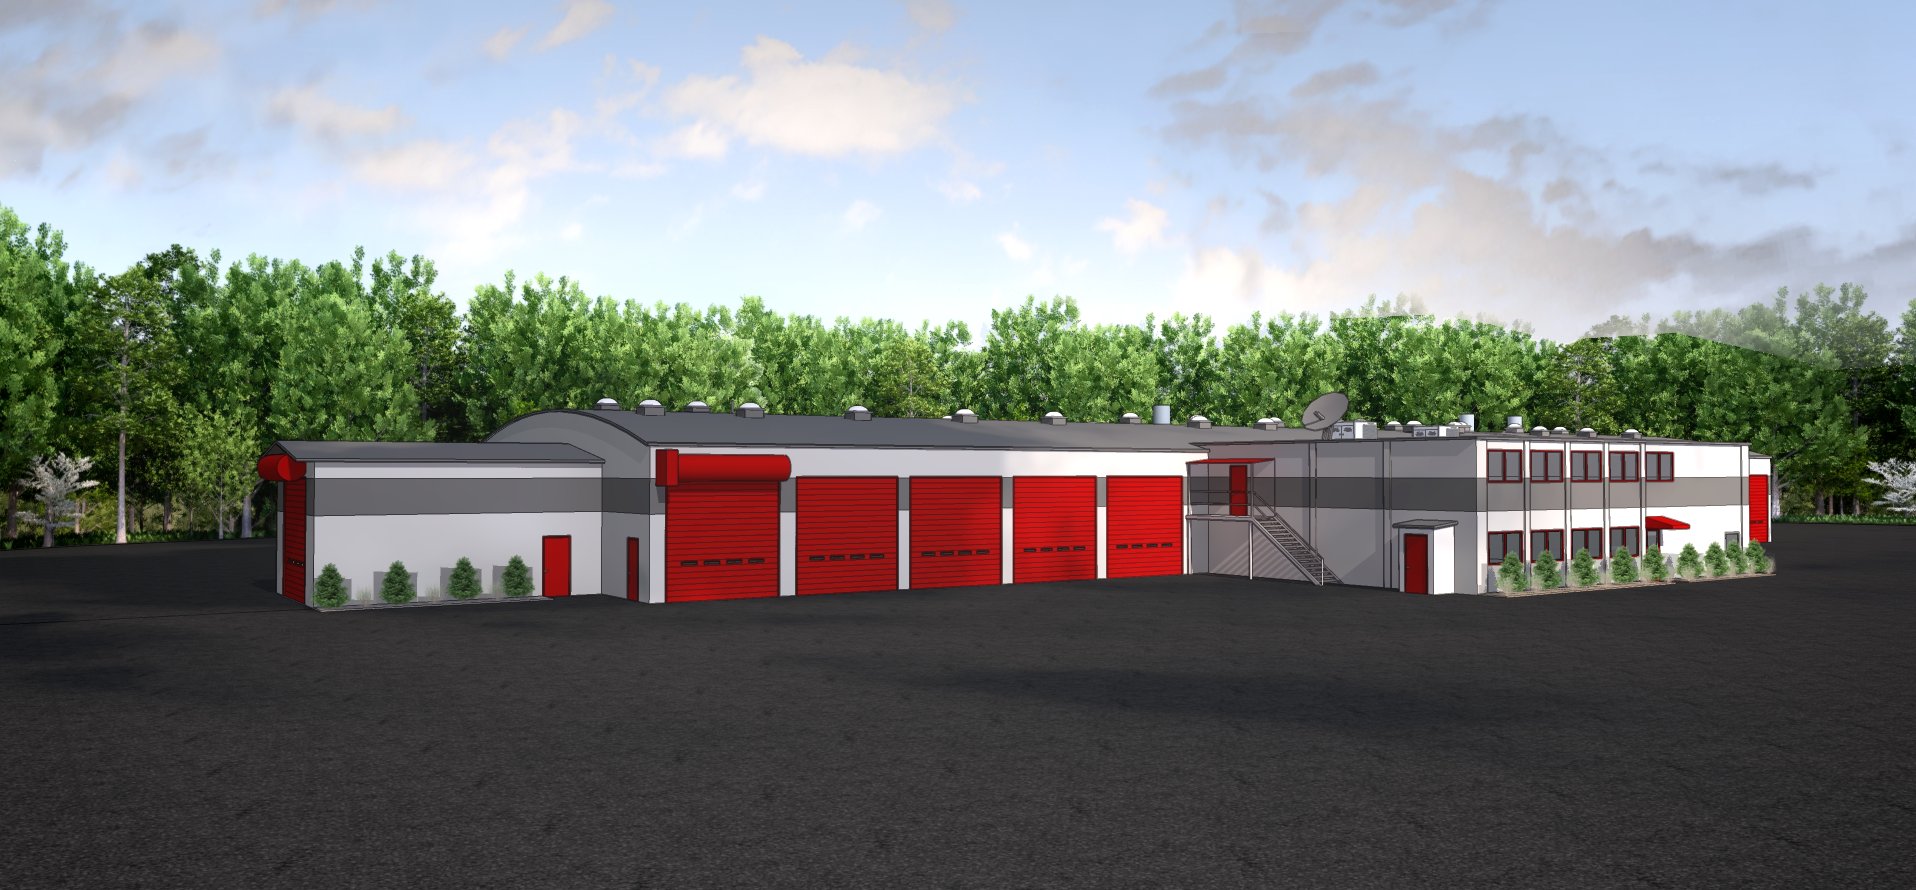 Industrial Warehouse Storage coming soon! Secure, Climate Controlled--inquire today!